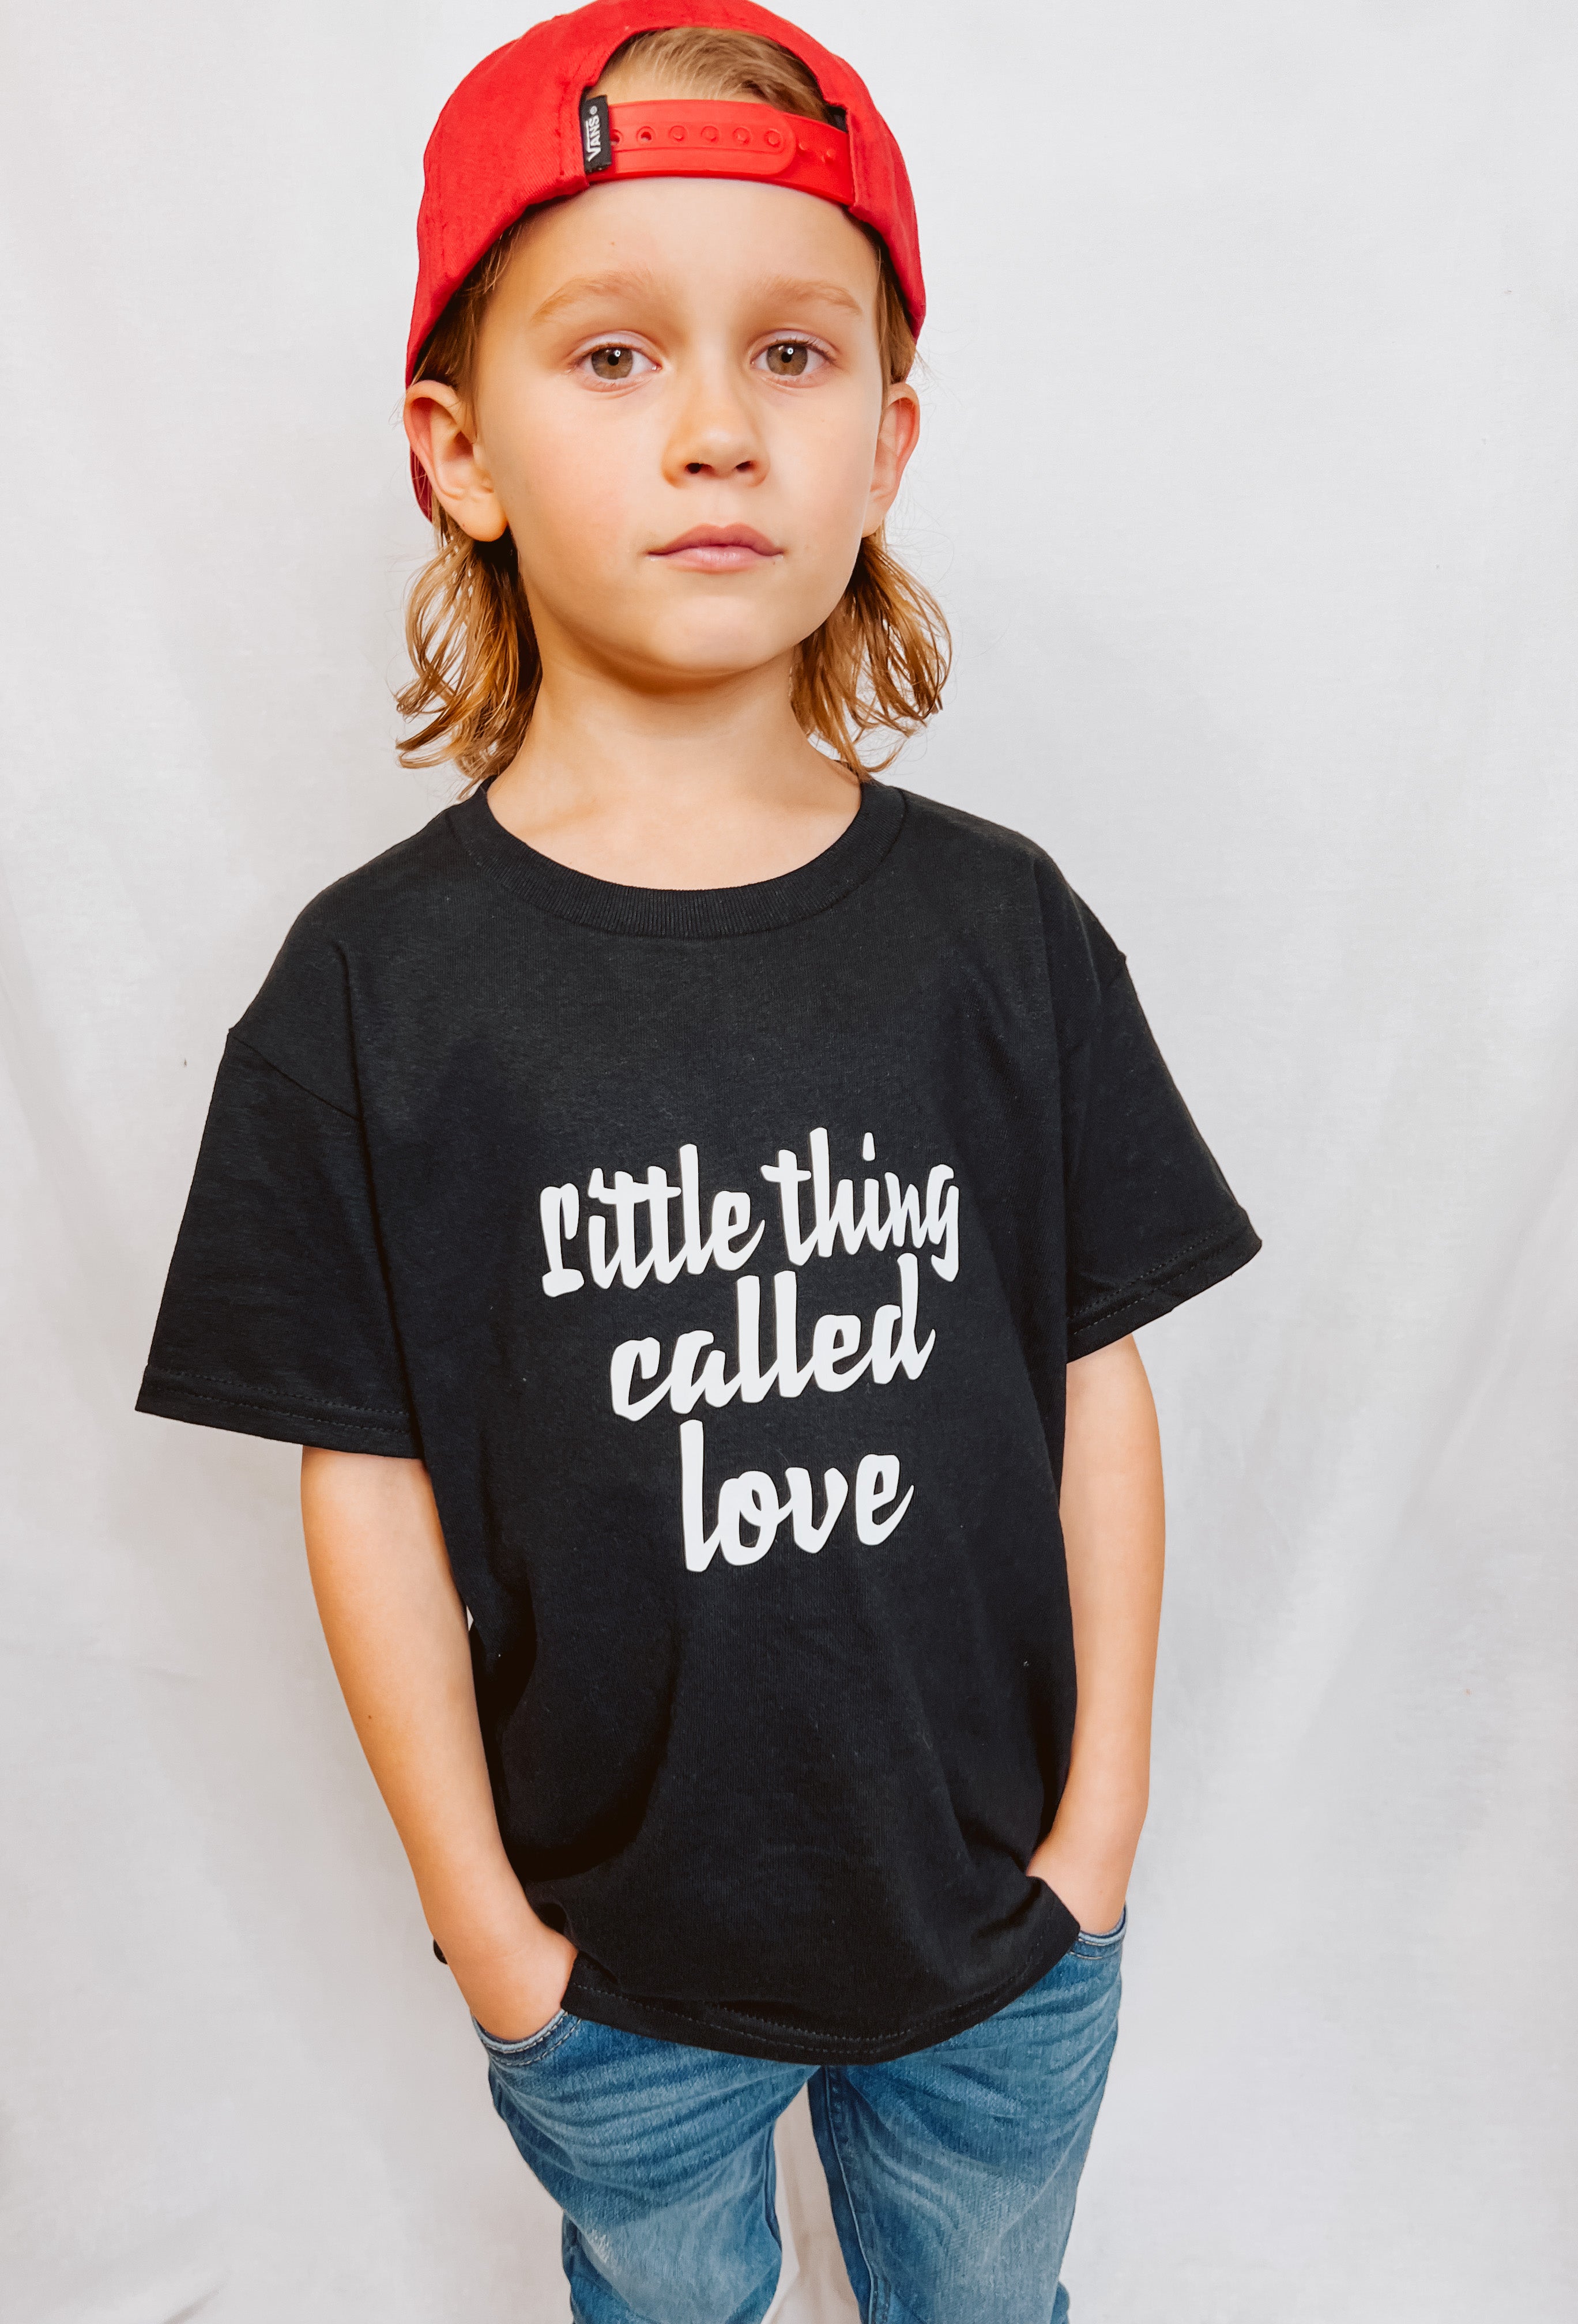 Little Thing Called Love Tee